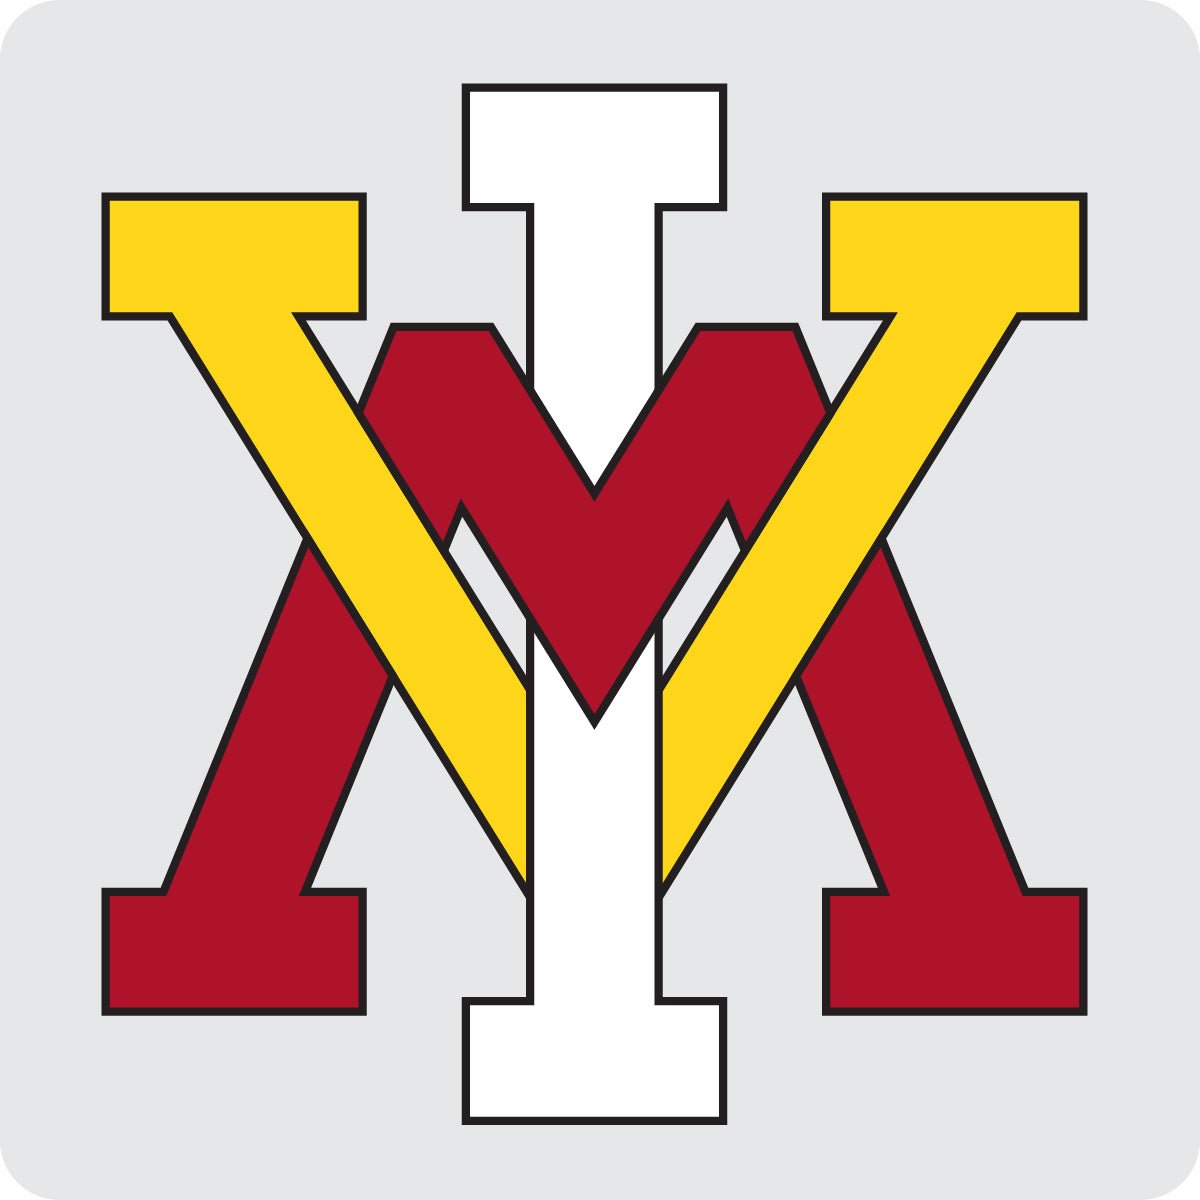 VMI Keydets Coasters Choice Of Marble Of Acrylic - Acrylic (8-Pack)